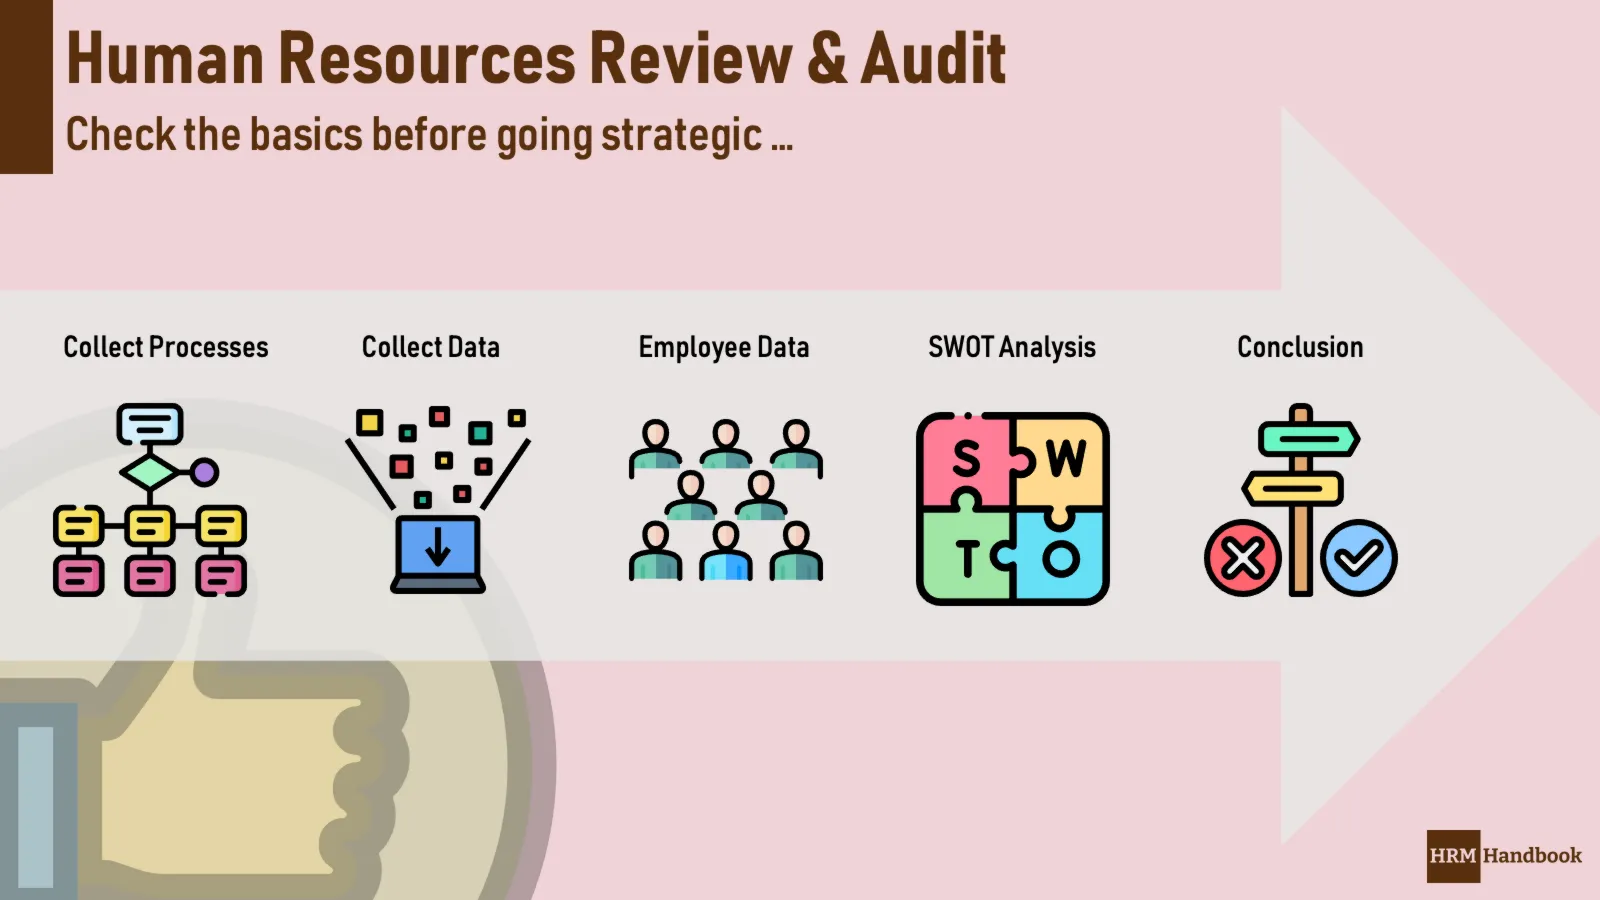 Human Resources Review (Audit) as a first step in the implementation of strategic processes